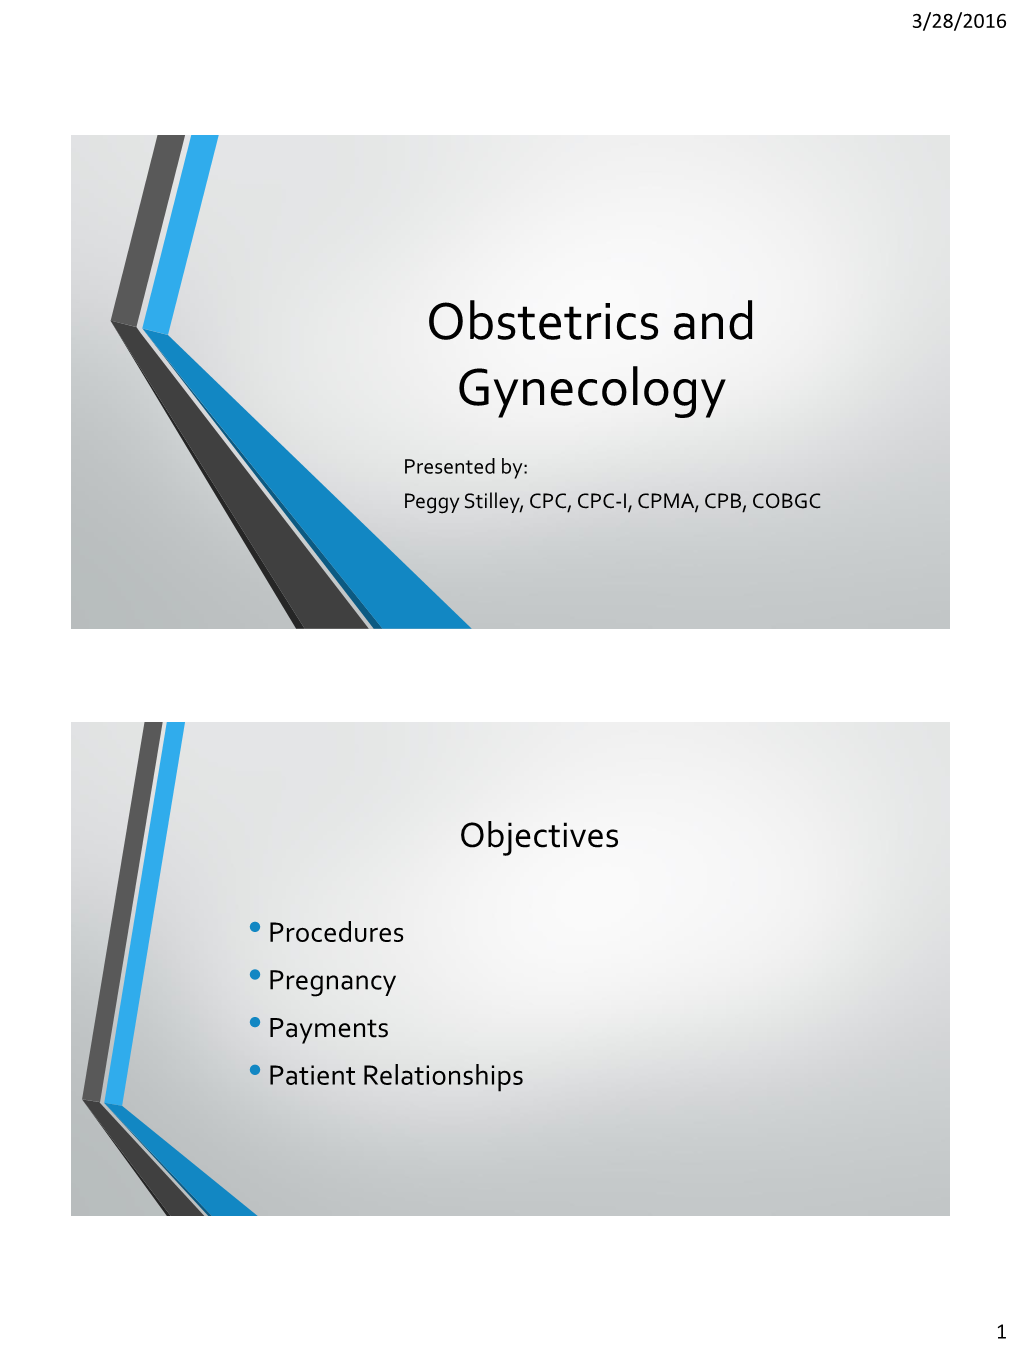 Obstetrics and Gyneclogy